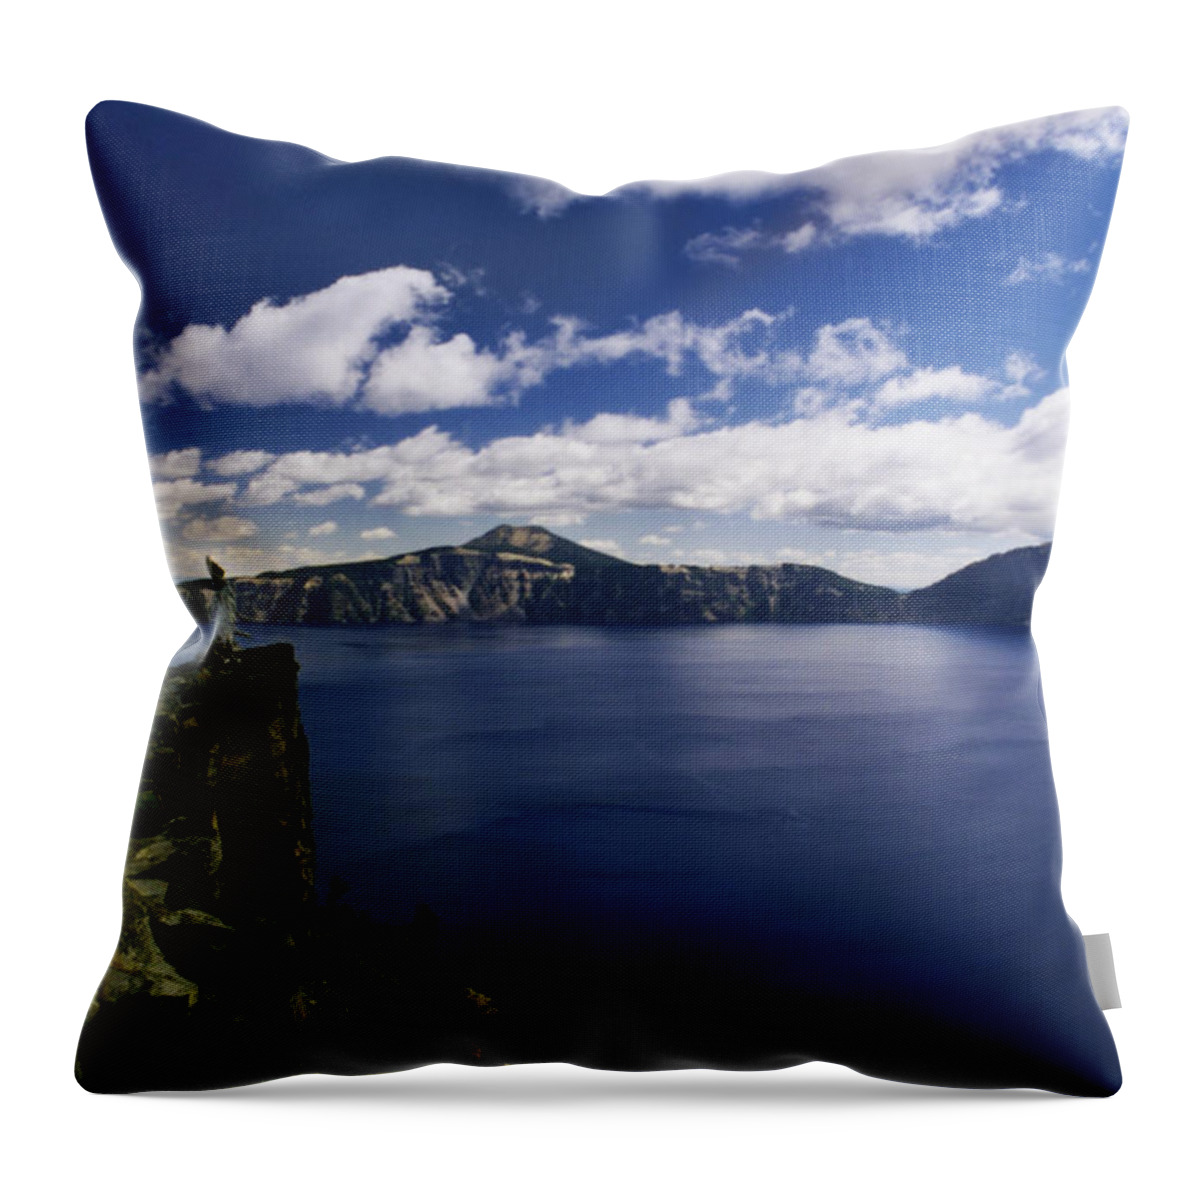 Scenics Throw Pillow featuring the photograph Man And Tree At The Edge Of Crater Lake by Danielle D. Hughson